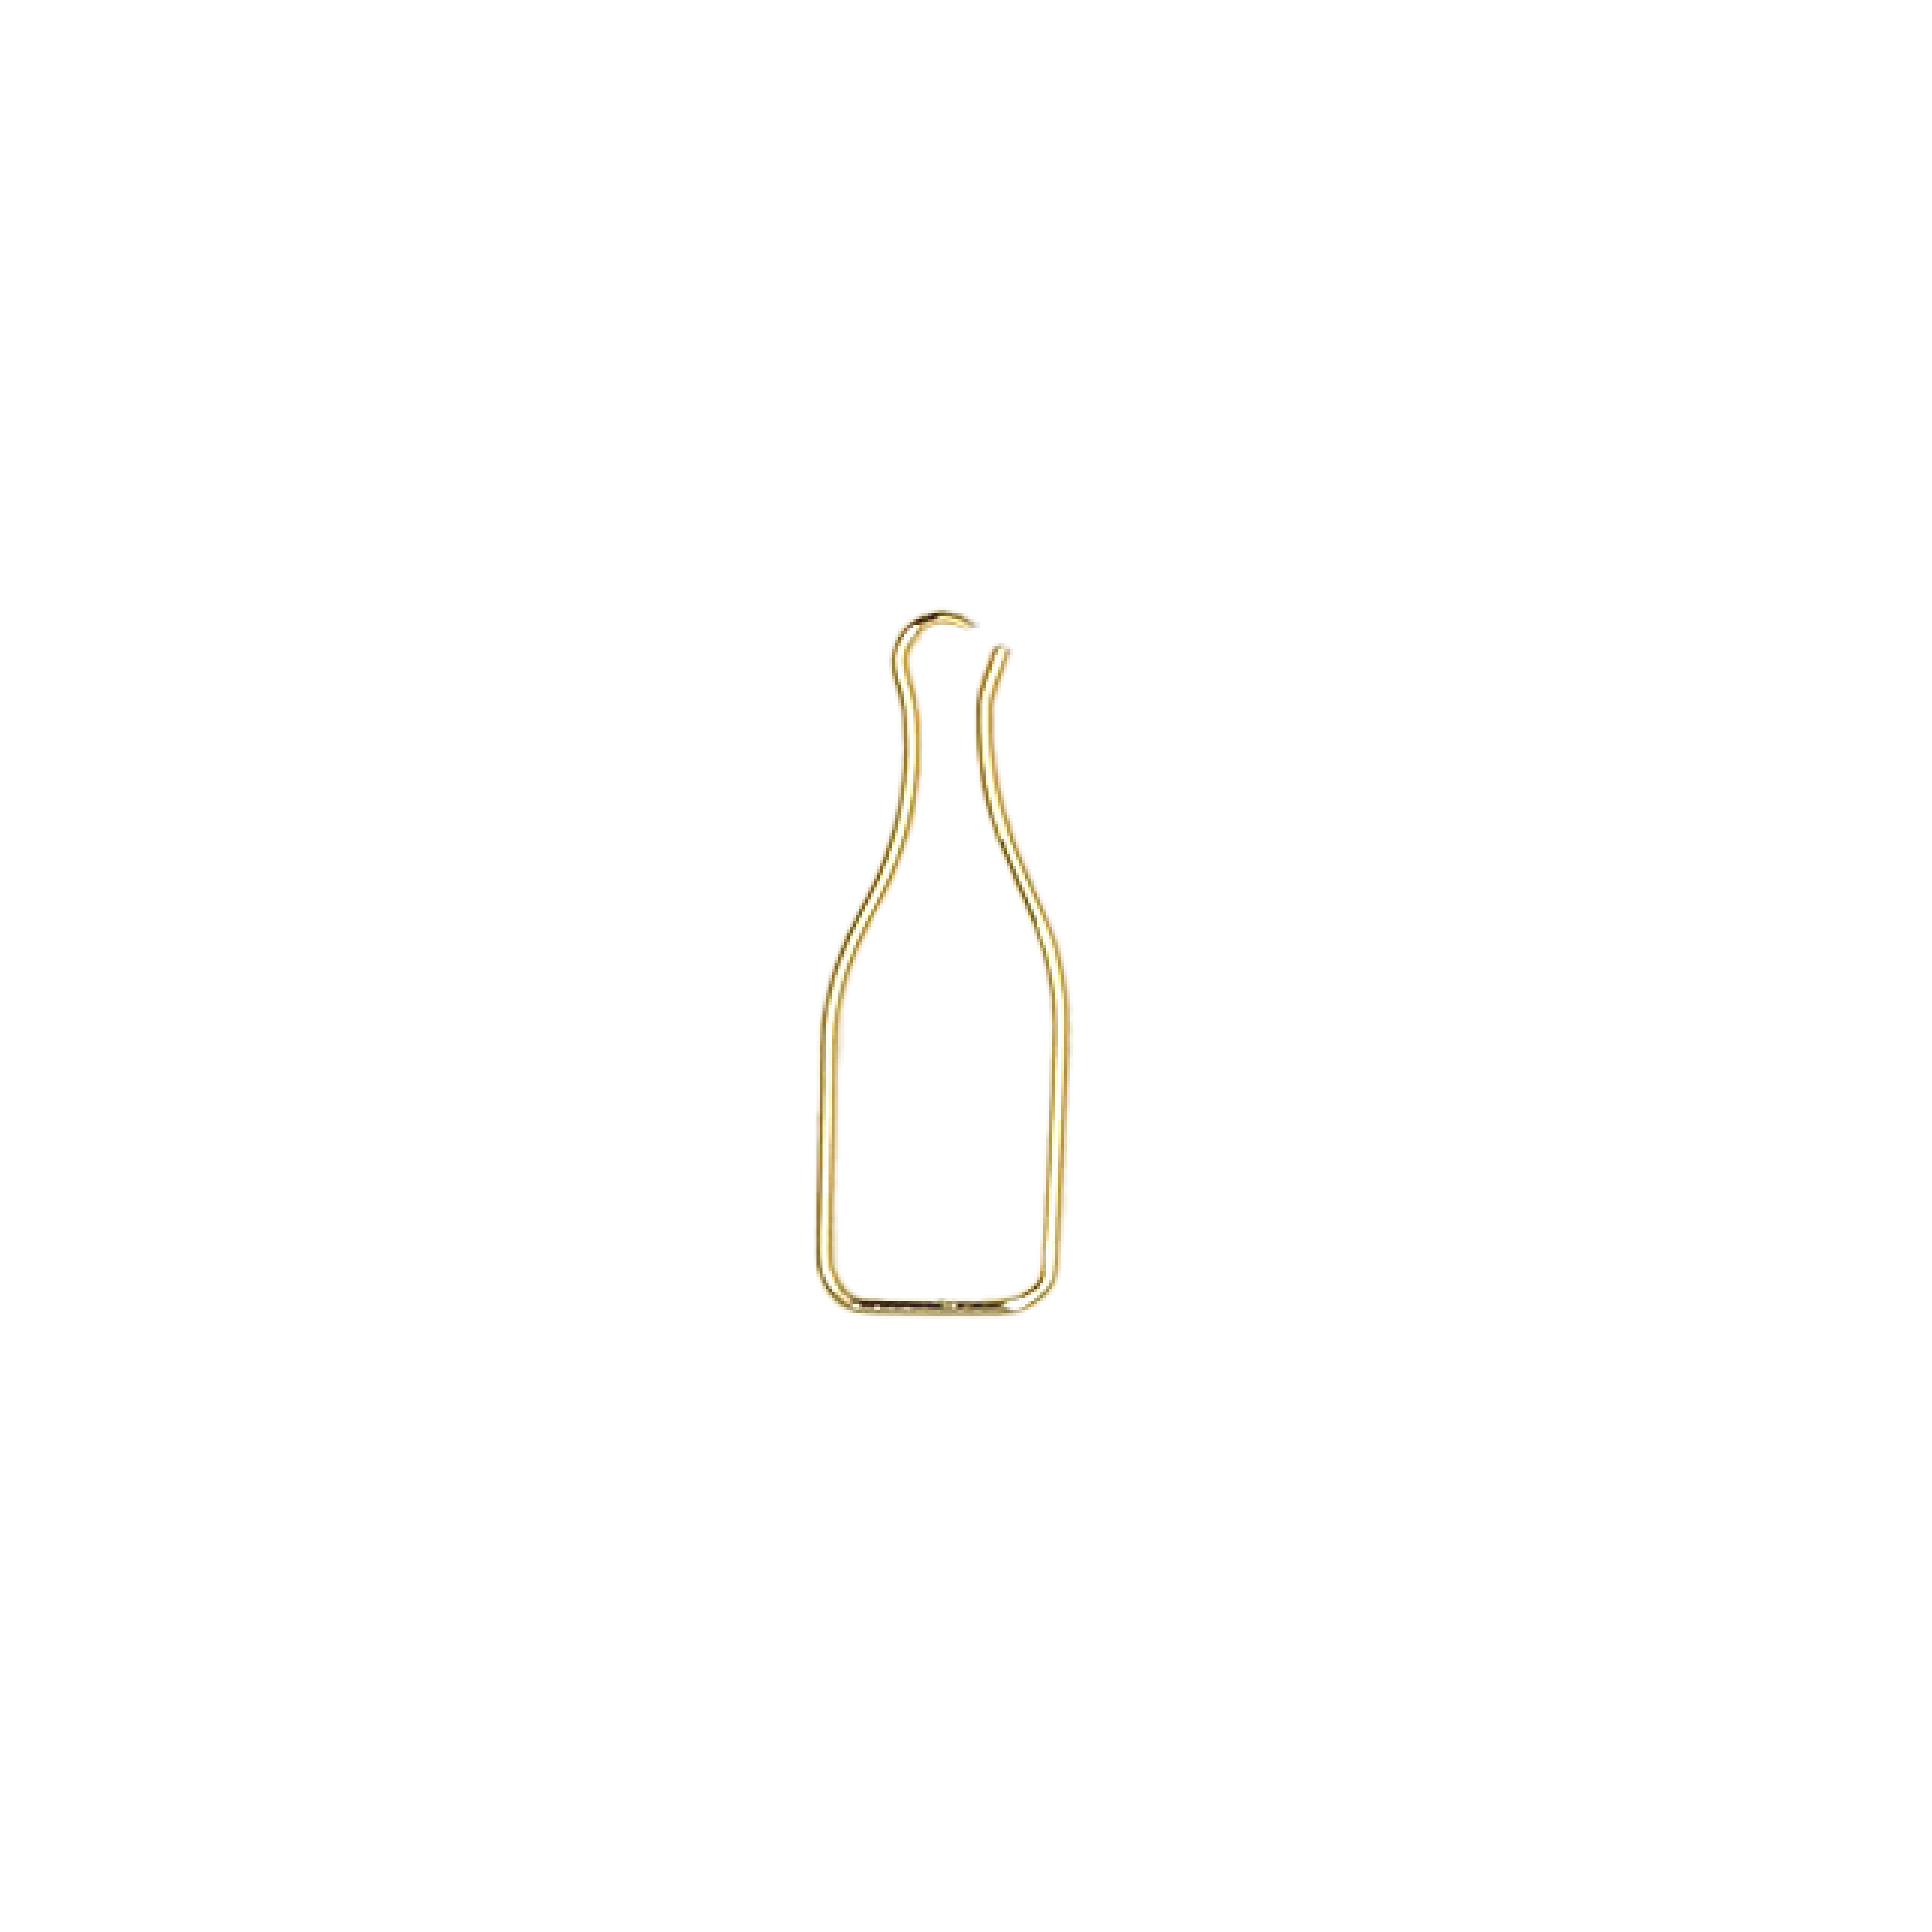 Champagne Bottle - 25 Gold Paperclips